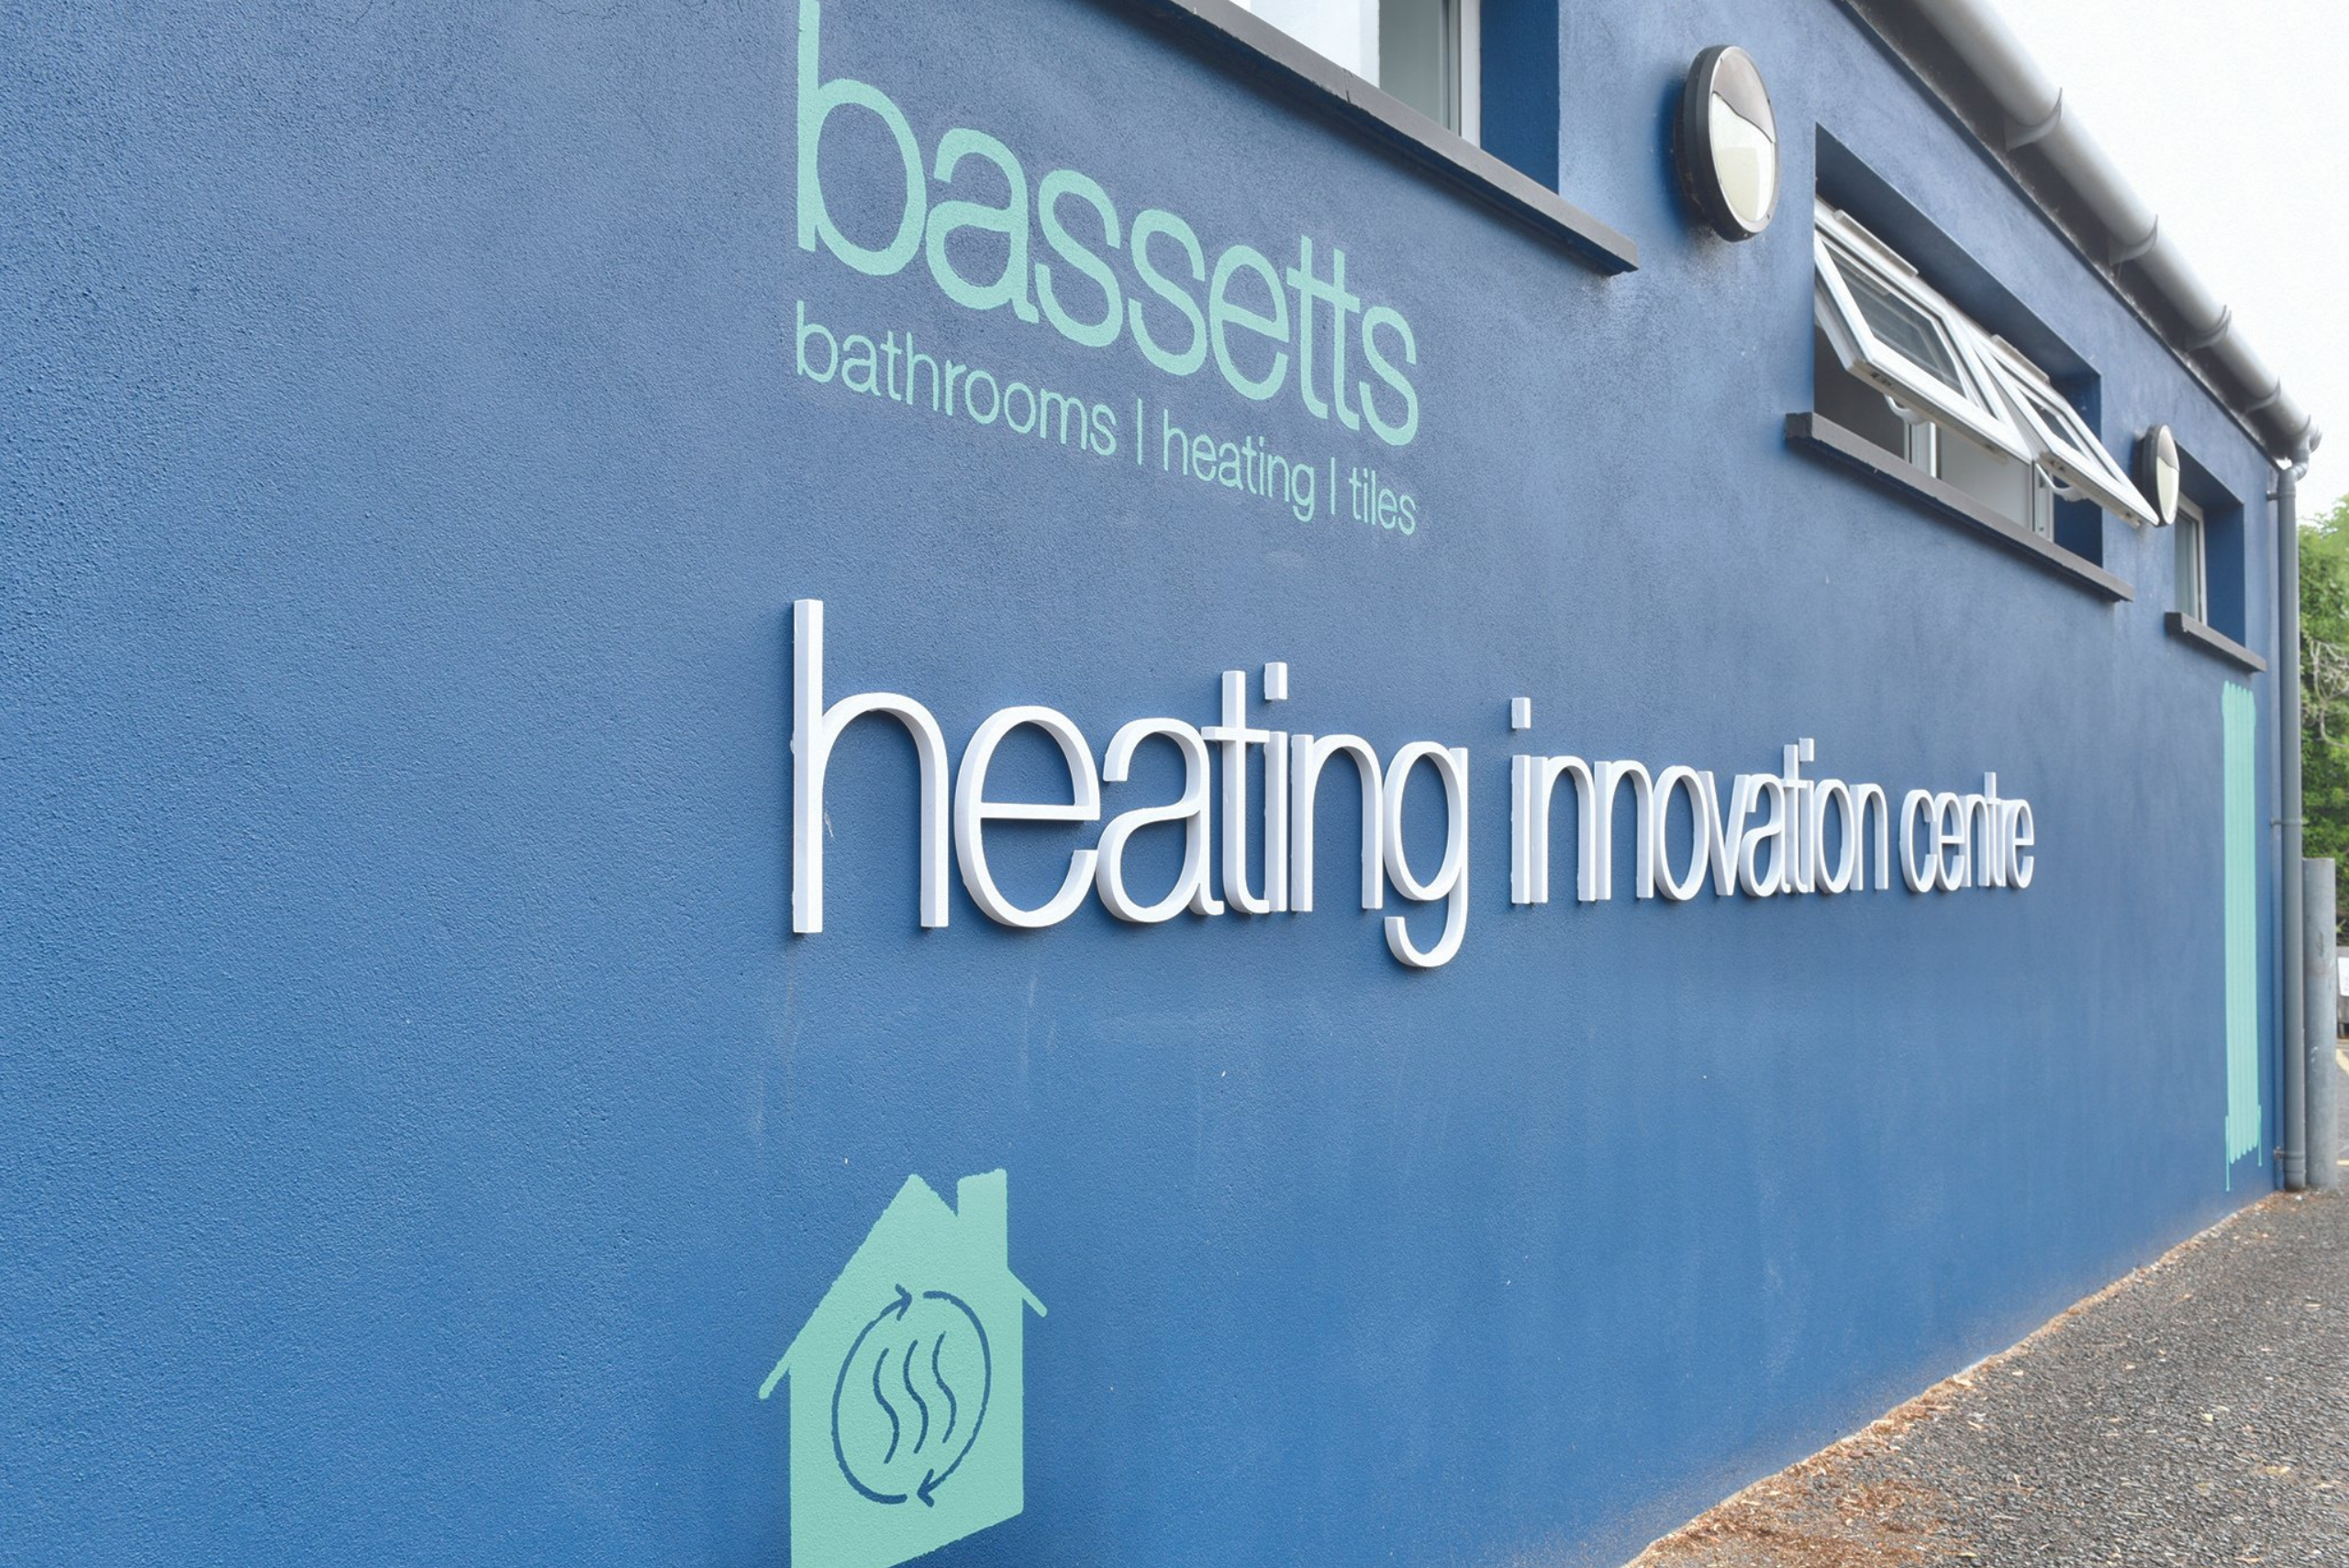 Plumber Reviews Renewable Heating at Bassetts Heating Innovation Centre